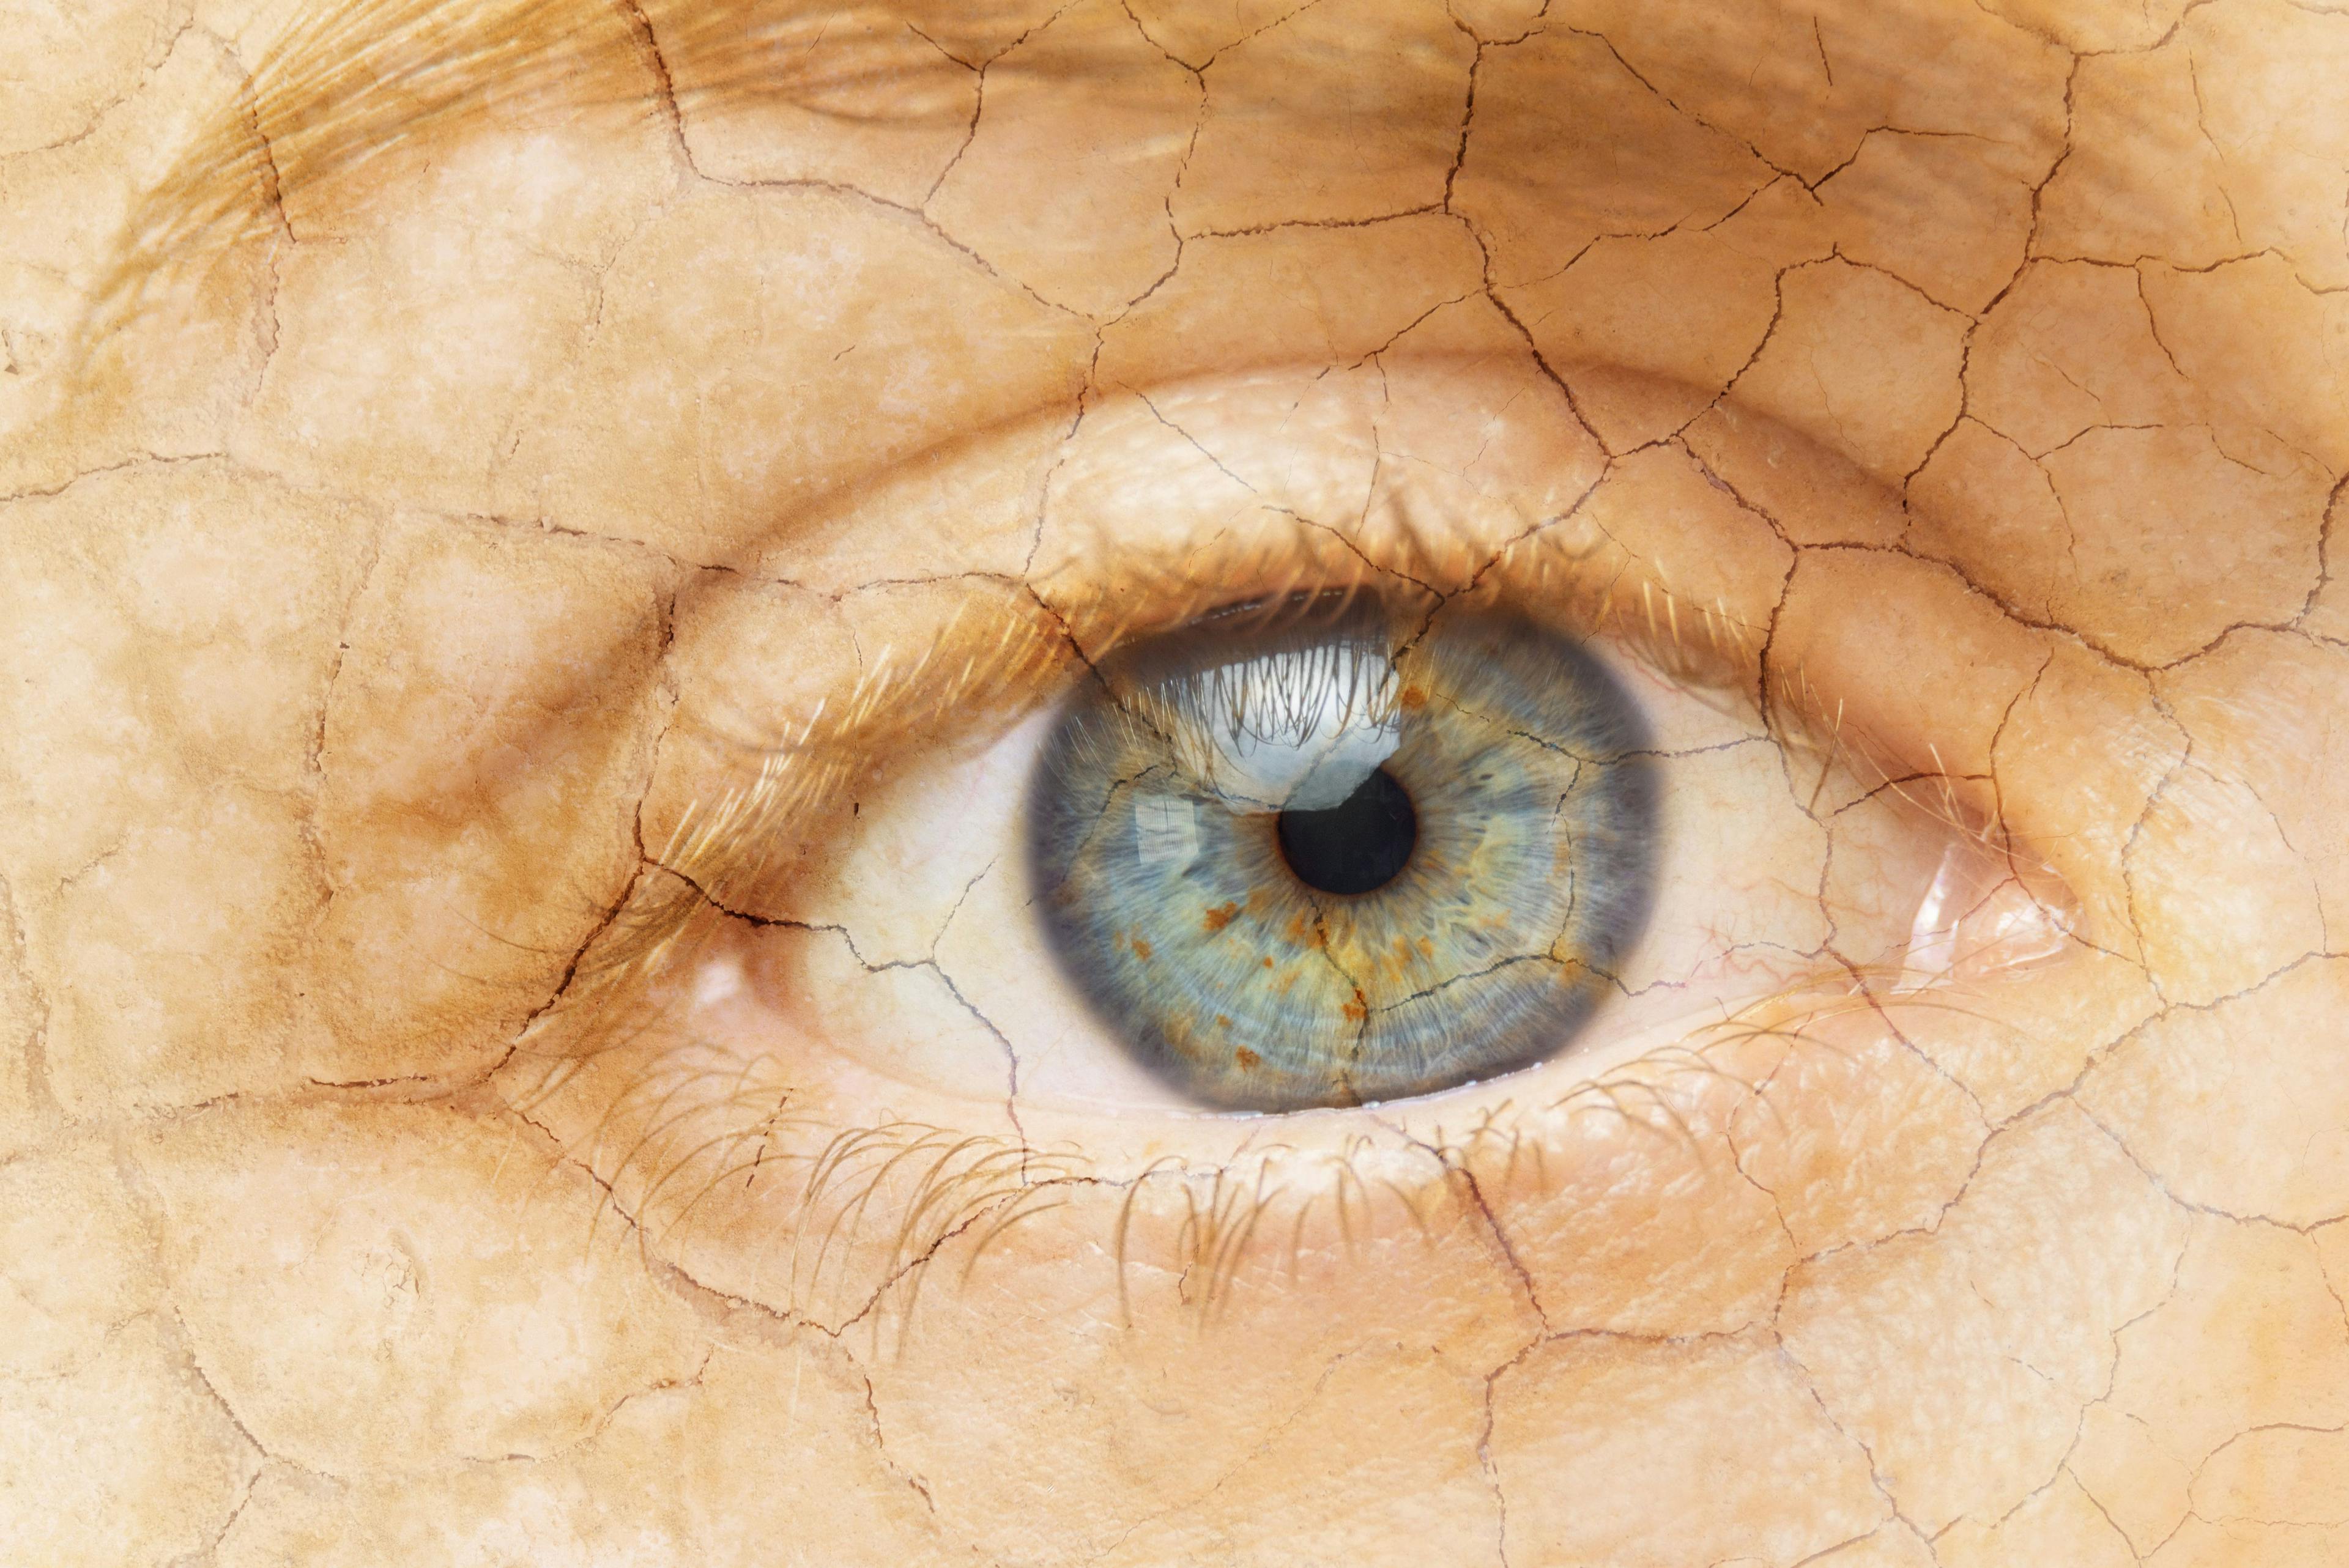 Allgenesis announces Phase 1b data showing AG-80308 providing improvements in dry eye patients